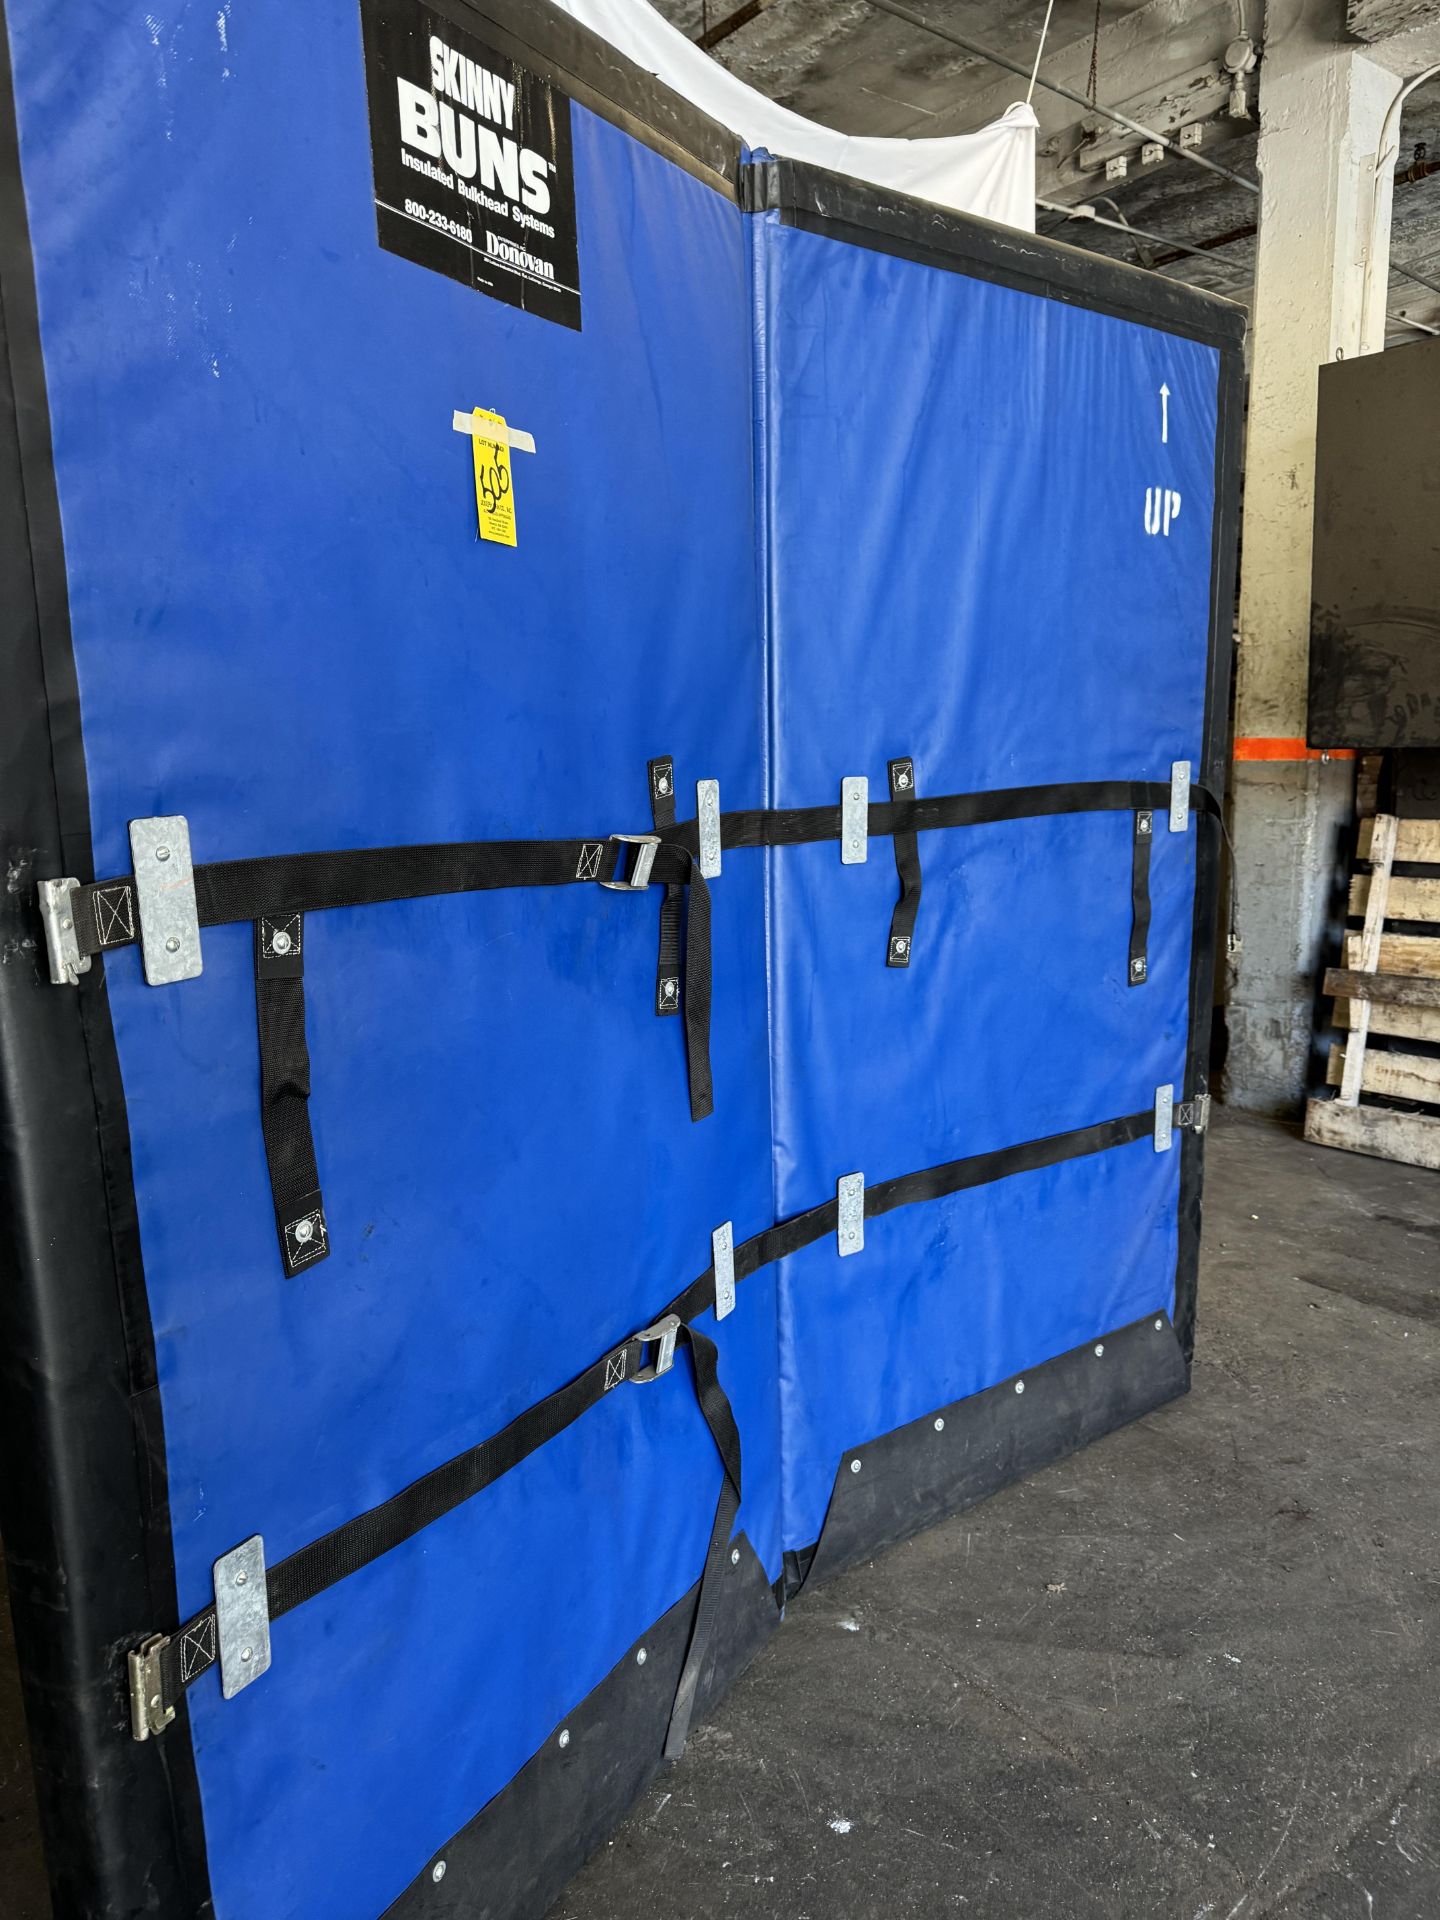 (1) Skinny Buns Insulated Bulkhead for Refrigerated Trucks, (2) Panel, 82" H x 44" W Per Panel - Image 3 of 6